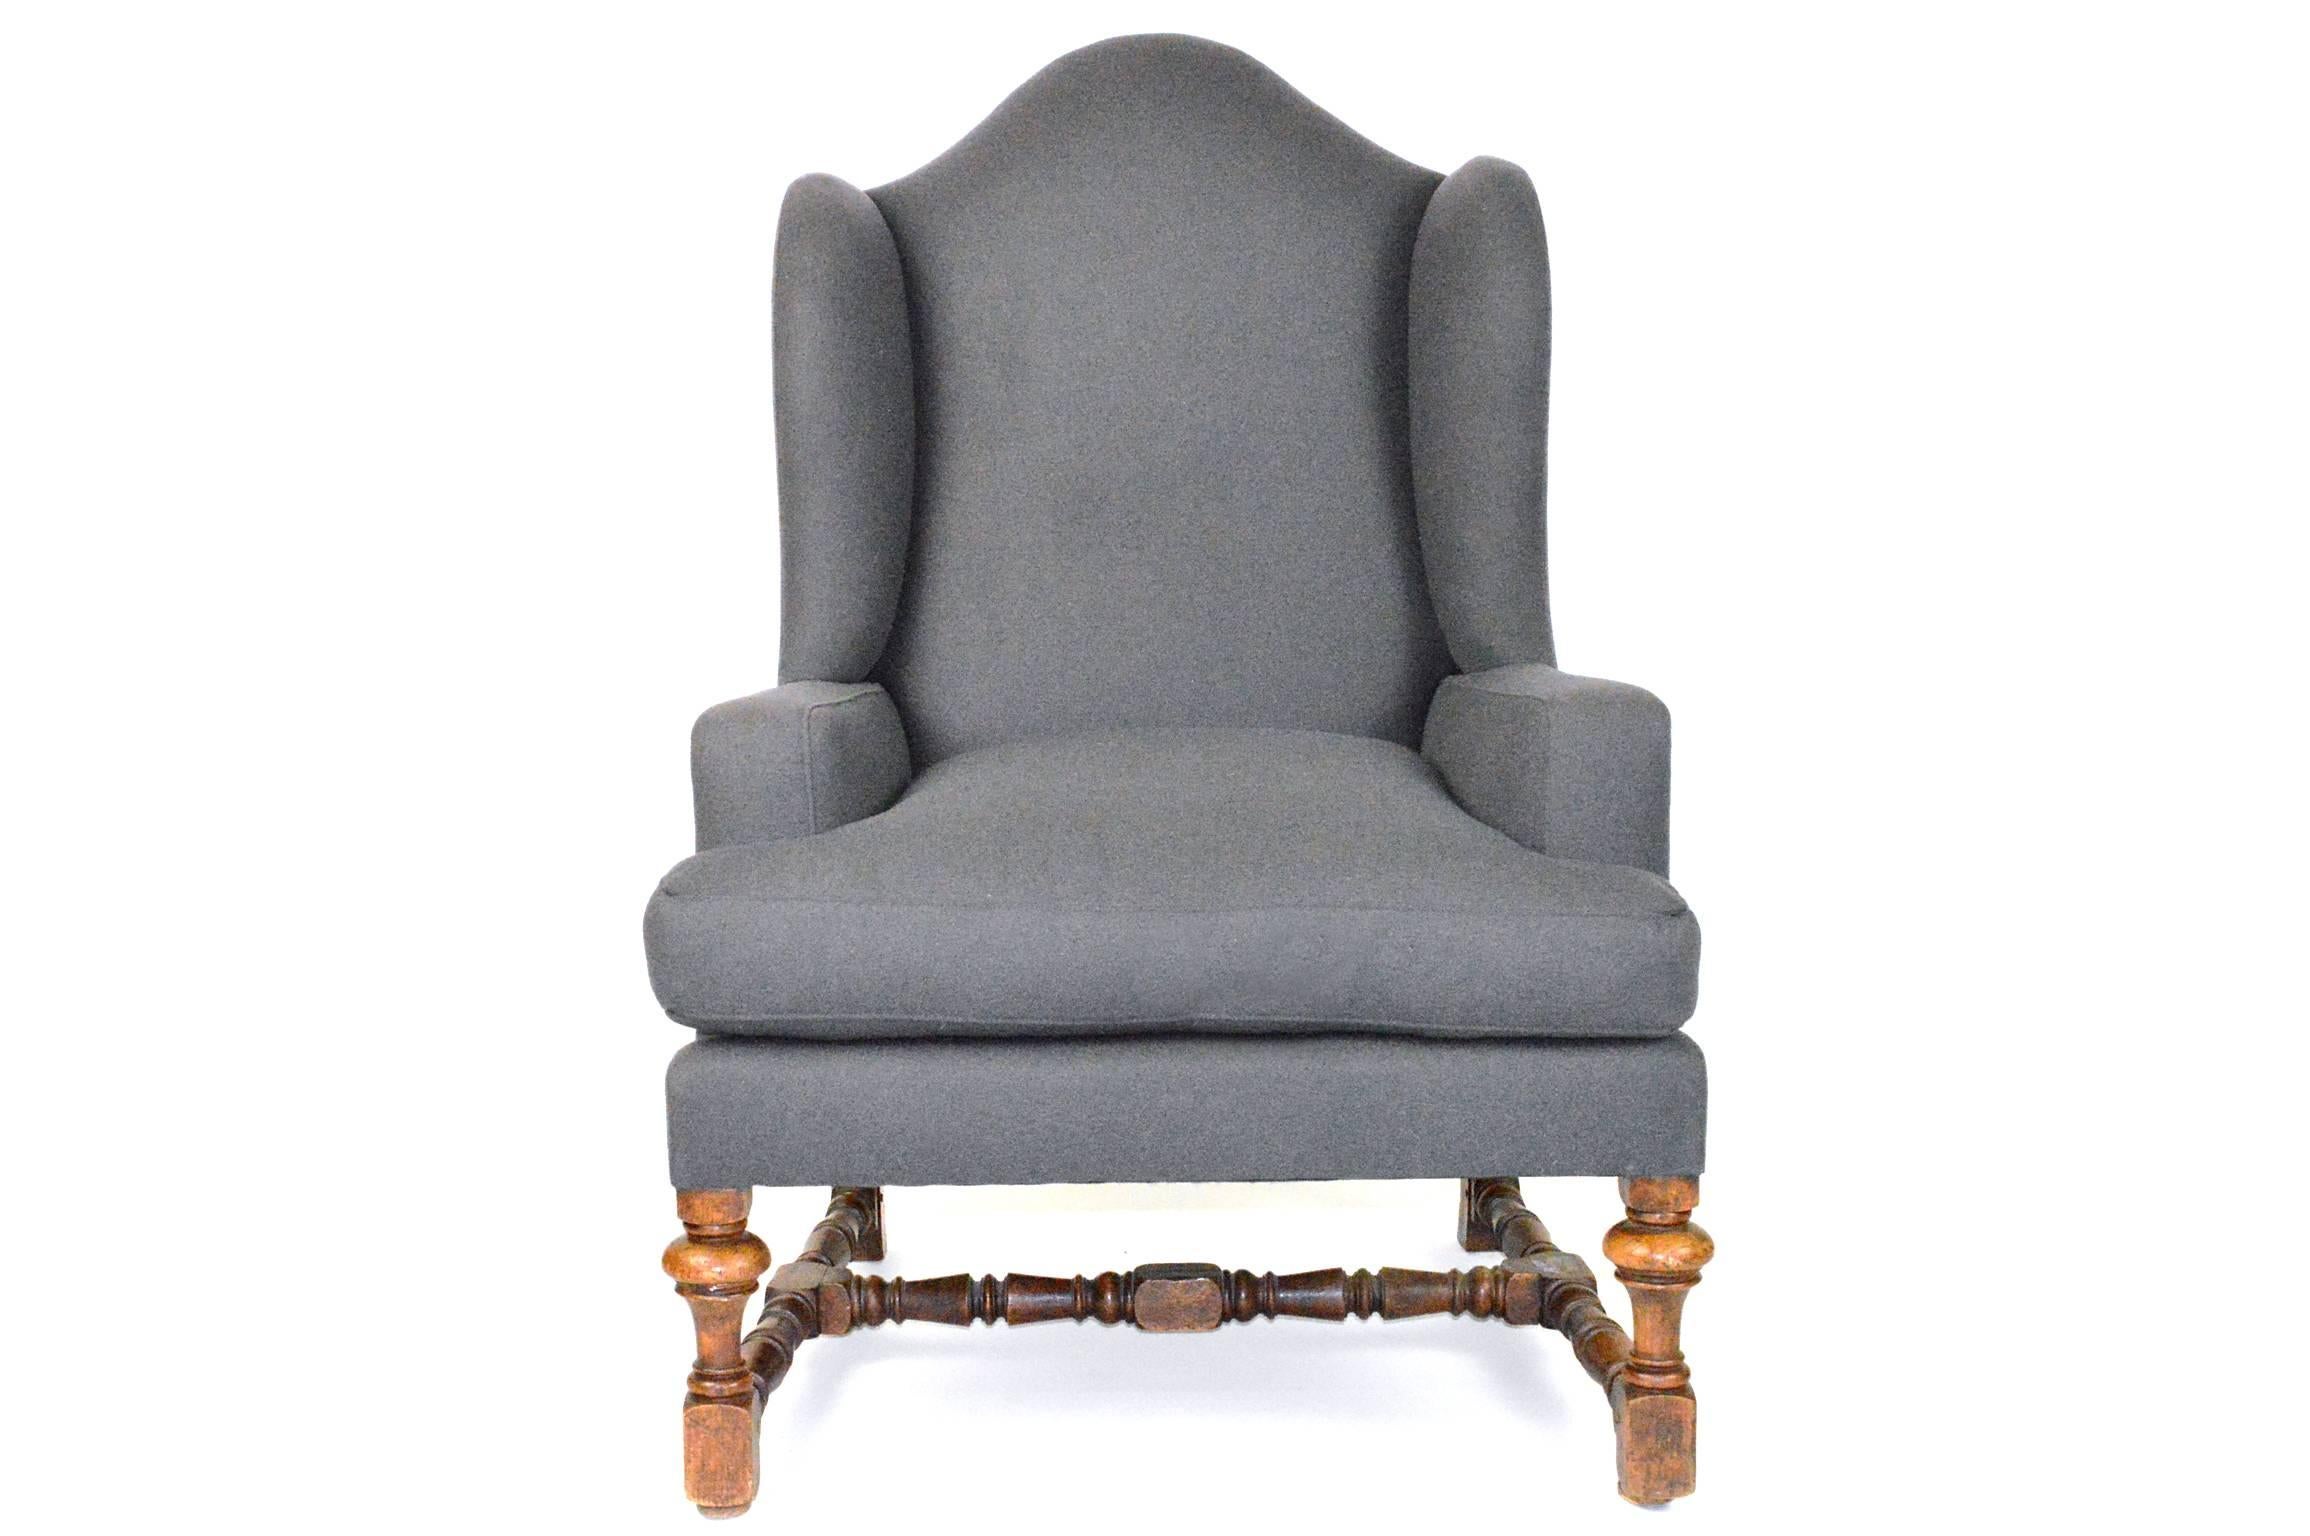 19th Century Baroque style wingback chair having an arched crest over two wings, upswept arms, removable cushioned seat surmounting oak ring block and baluster turned legs and stretcher. Upholstered in a grey felt wool.